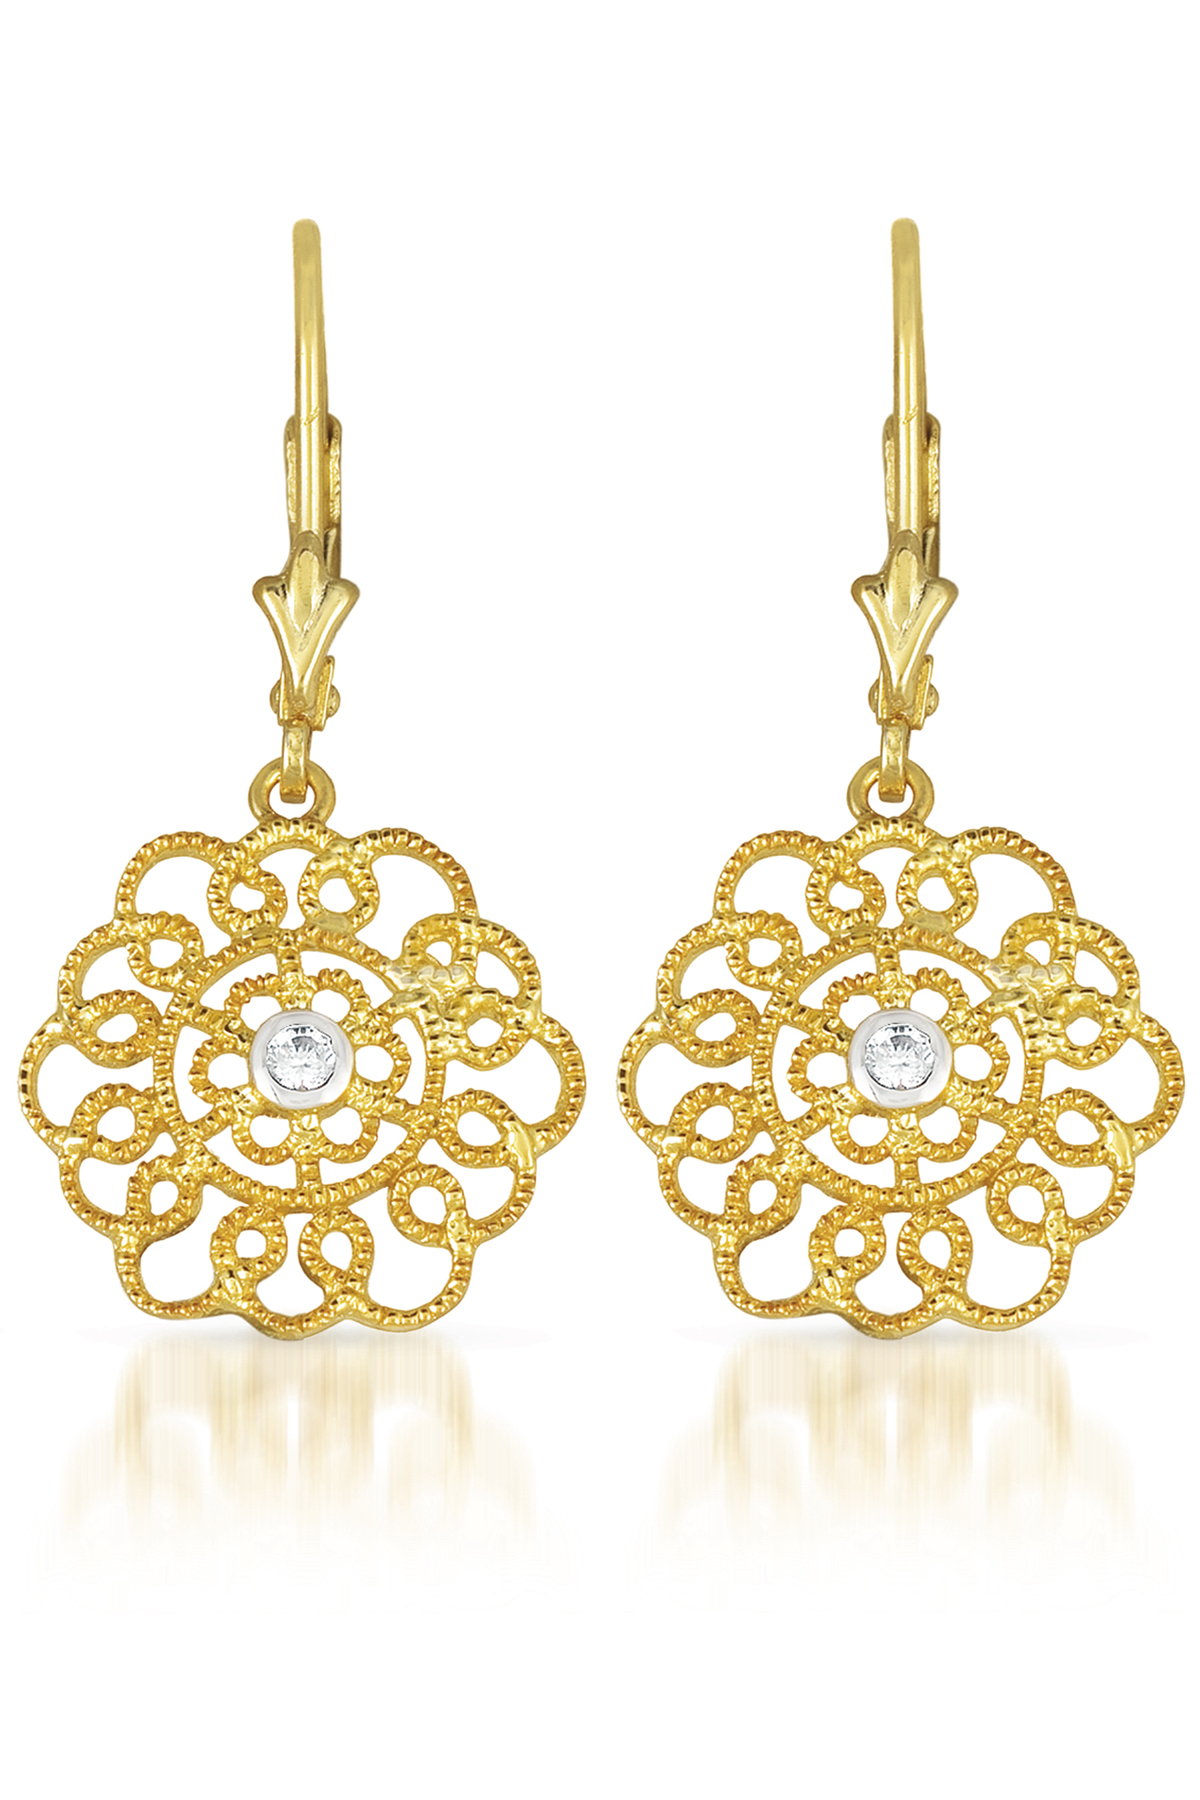 Cubic Zirconia (.925) Sterling Silver Gold Plated Lace Flower Euro Earrings